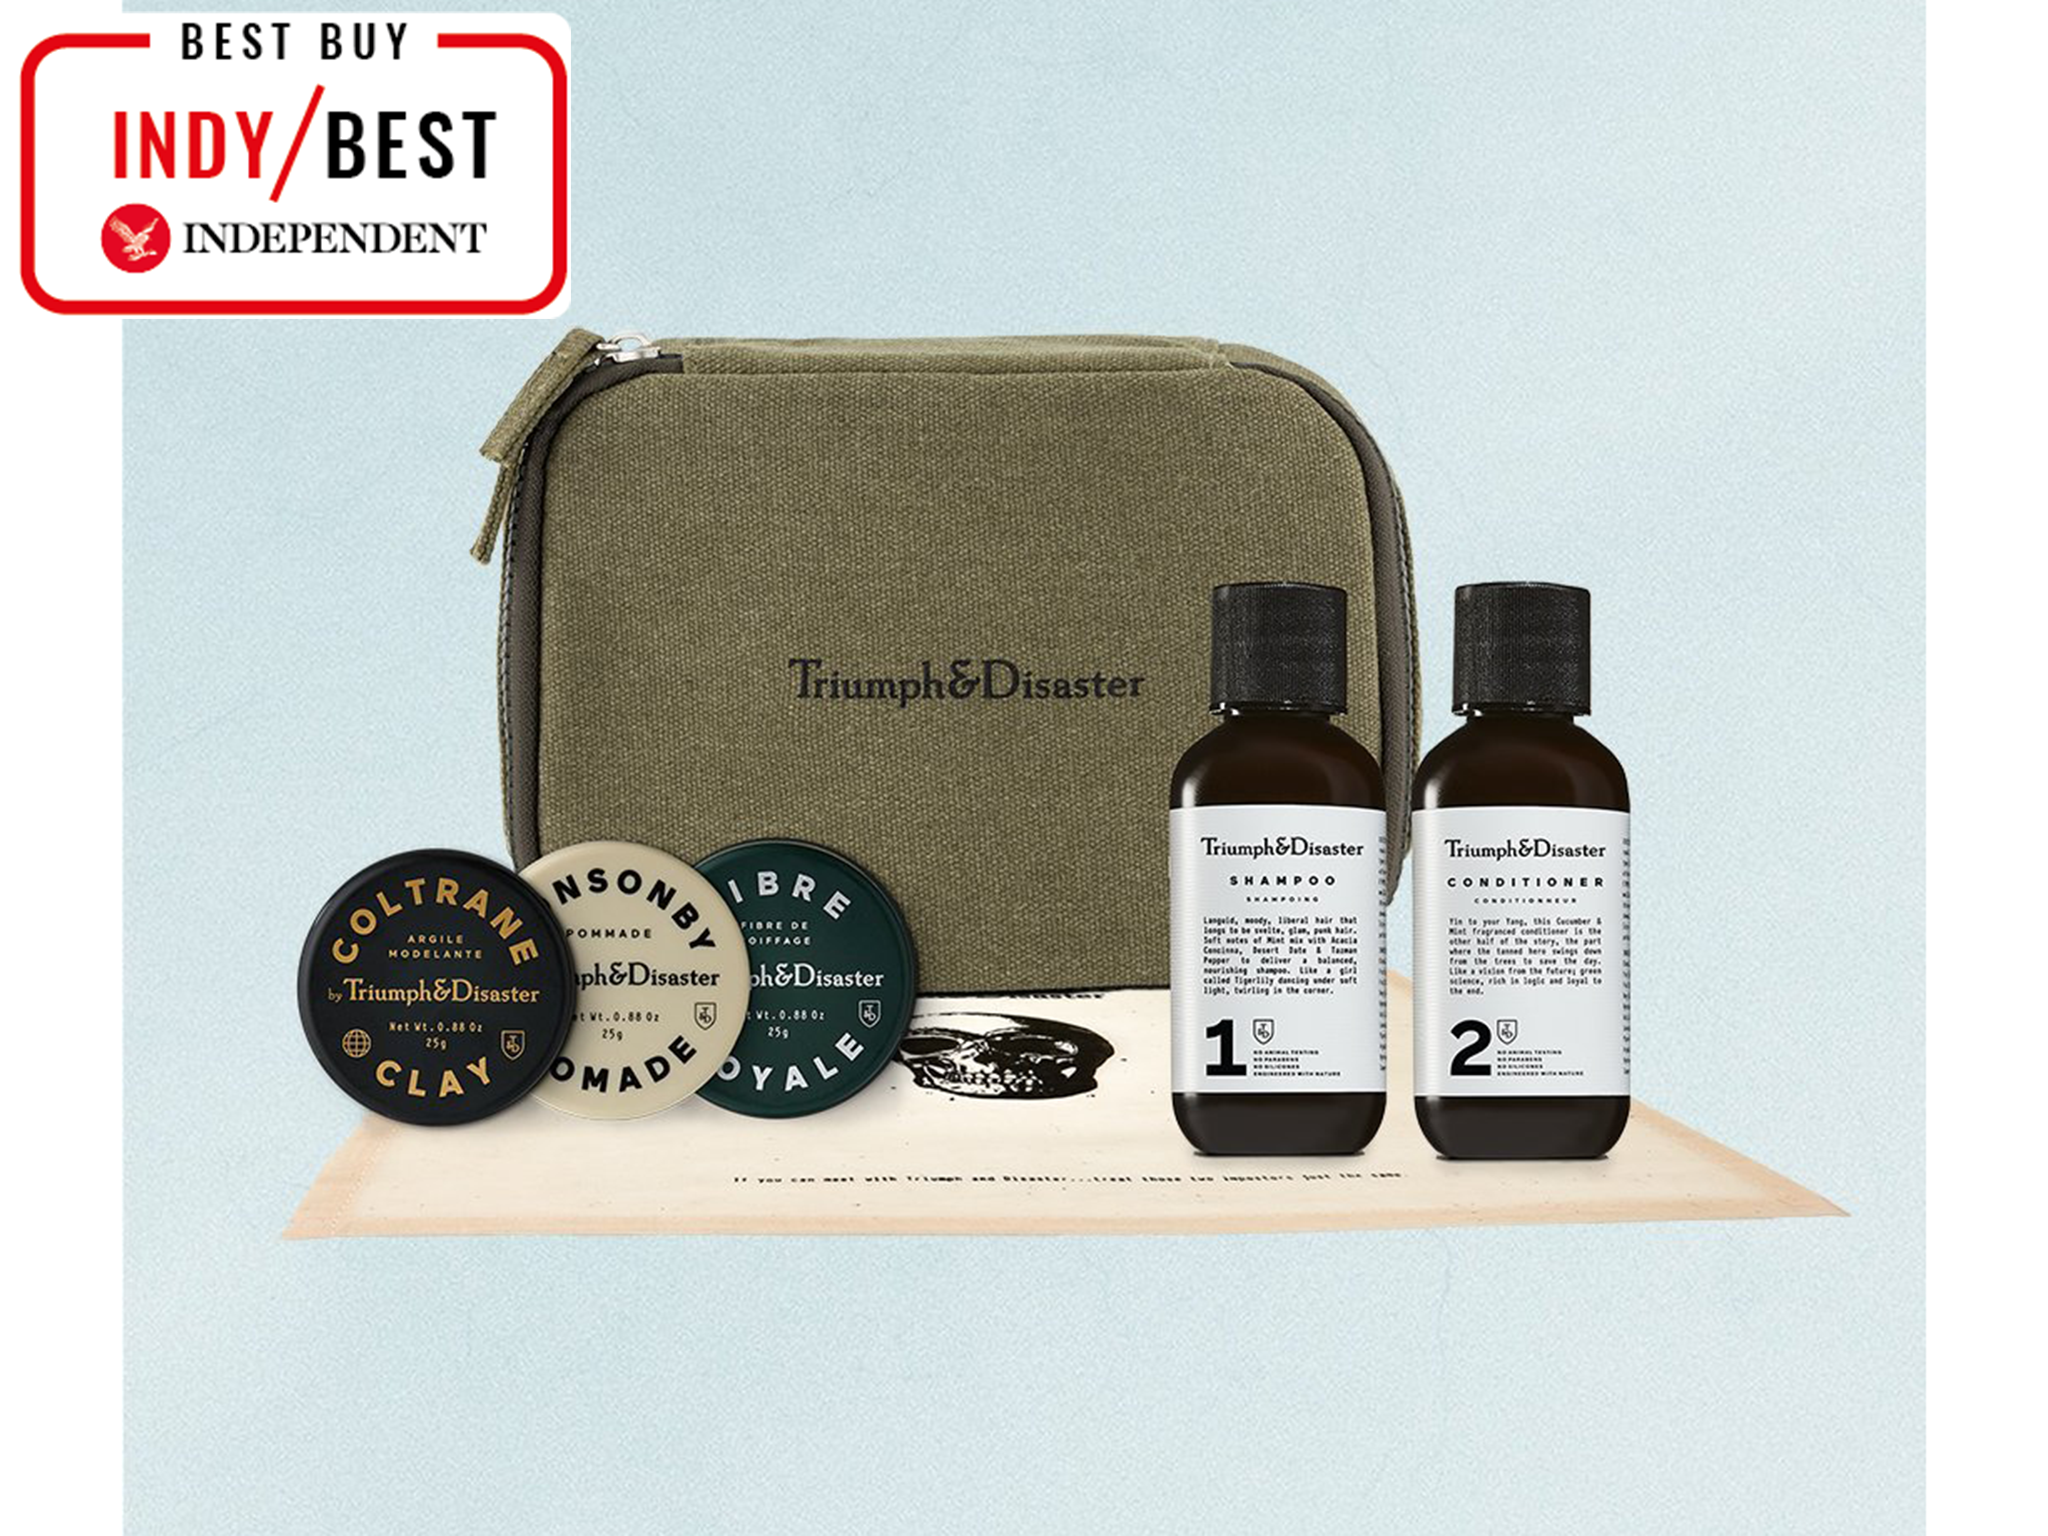 Triumph-disaster-indybest-mens-grooming-gifts.png